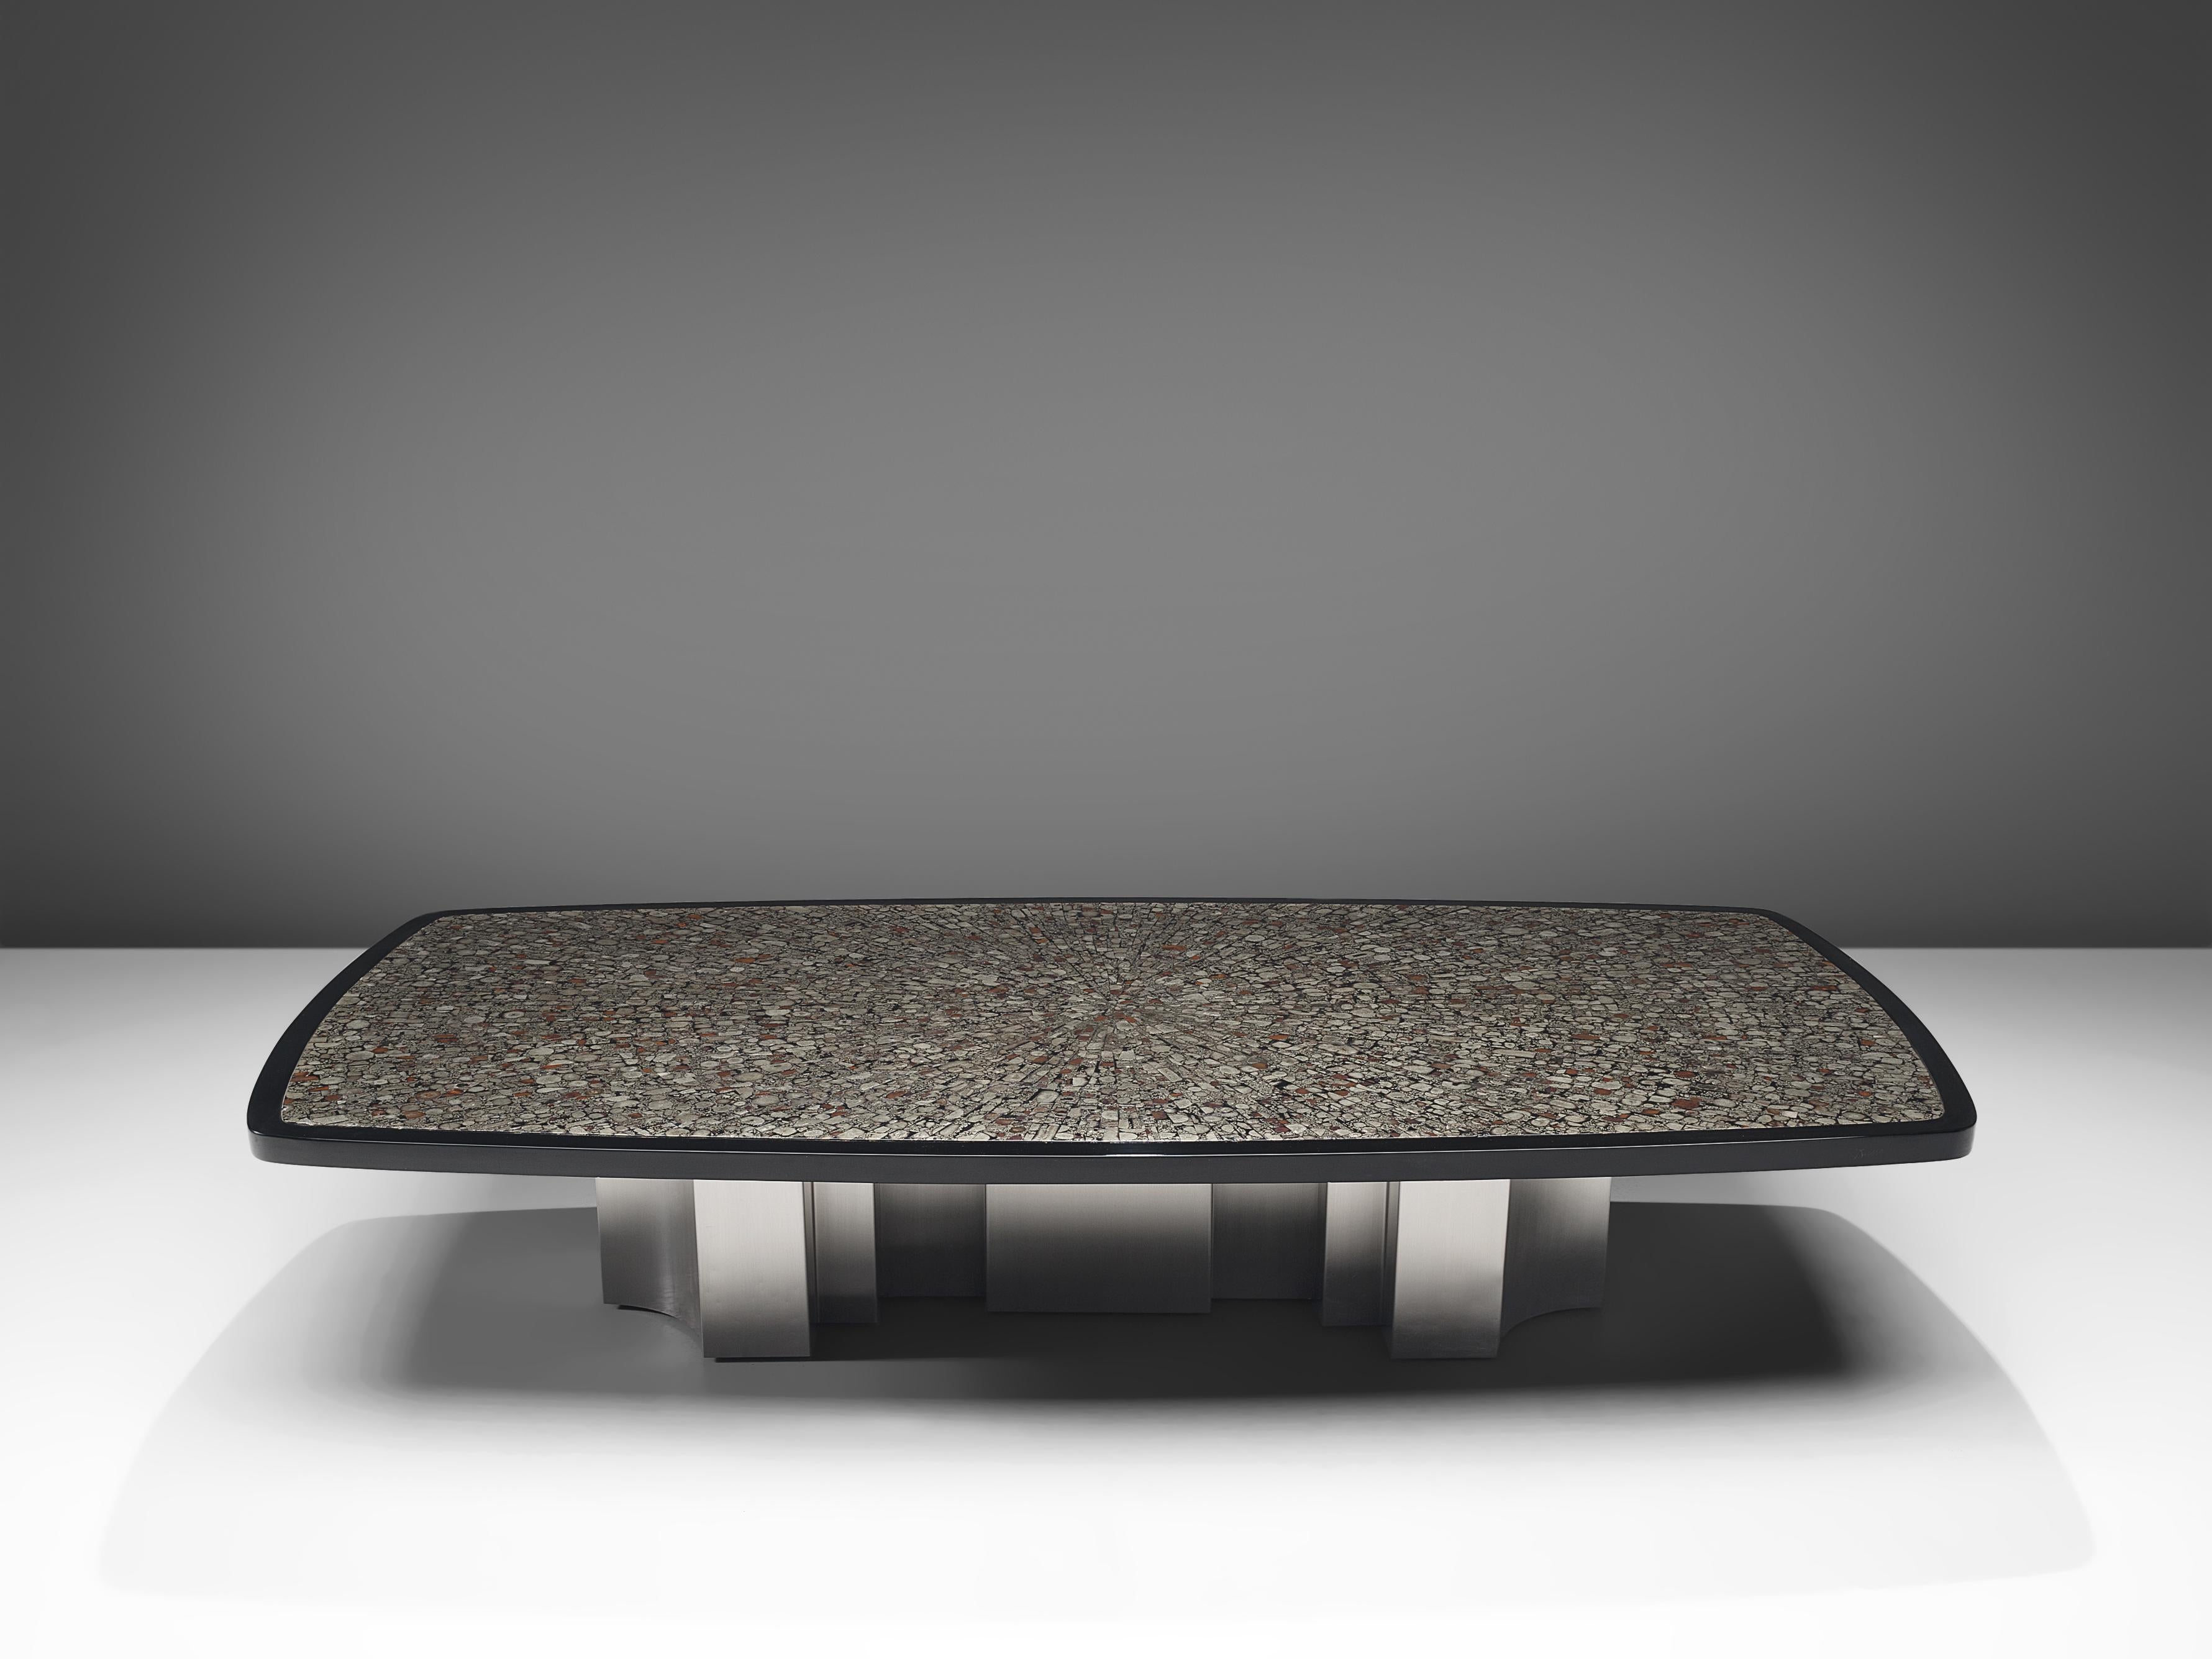 Jean Claude Dresse, large coffee table, marcasite, wood, steel, Belgium, 1970s

This extraordinary piece was crafted with great eye for proportions and detail, typical for the work of Dresse. The luxurious character of the marcasite inlay